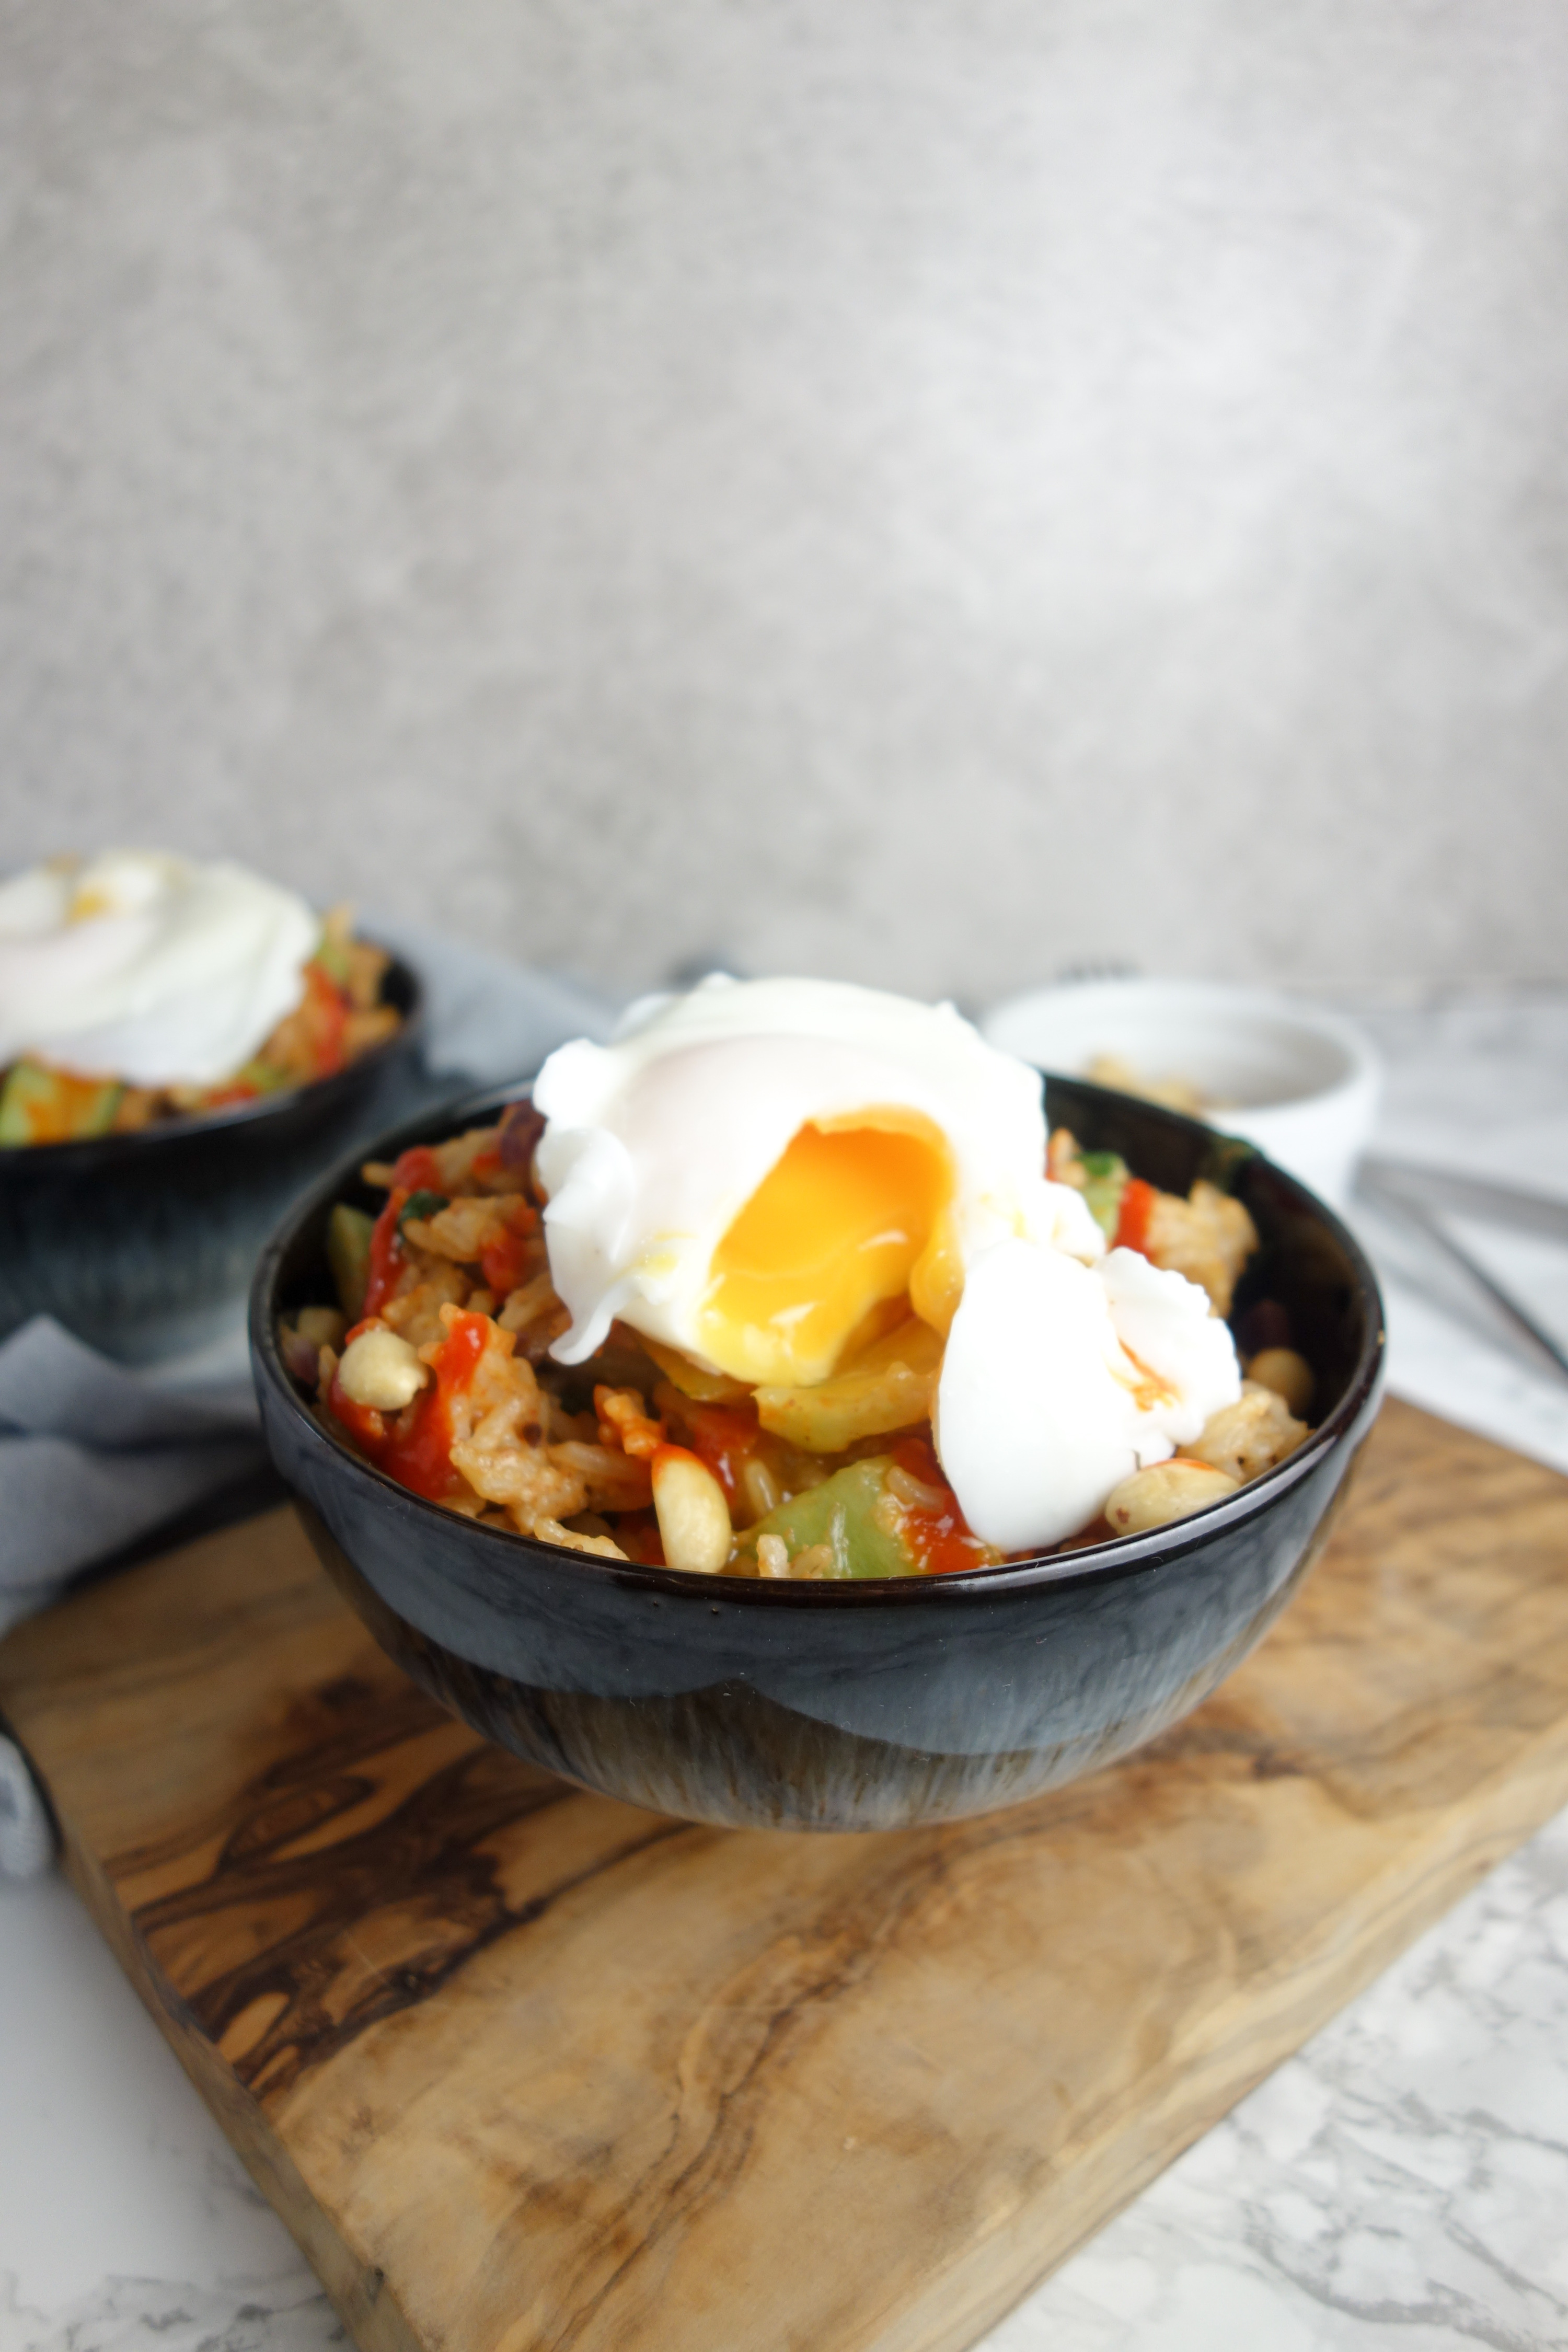 Rice & veg smothered in peanut butter, sriracha and soy sauce then topped with a perfectly poached egg - an easy recipe for spicy peanut rice!